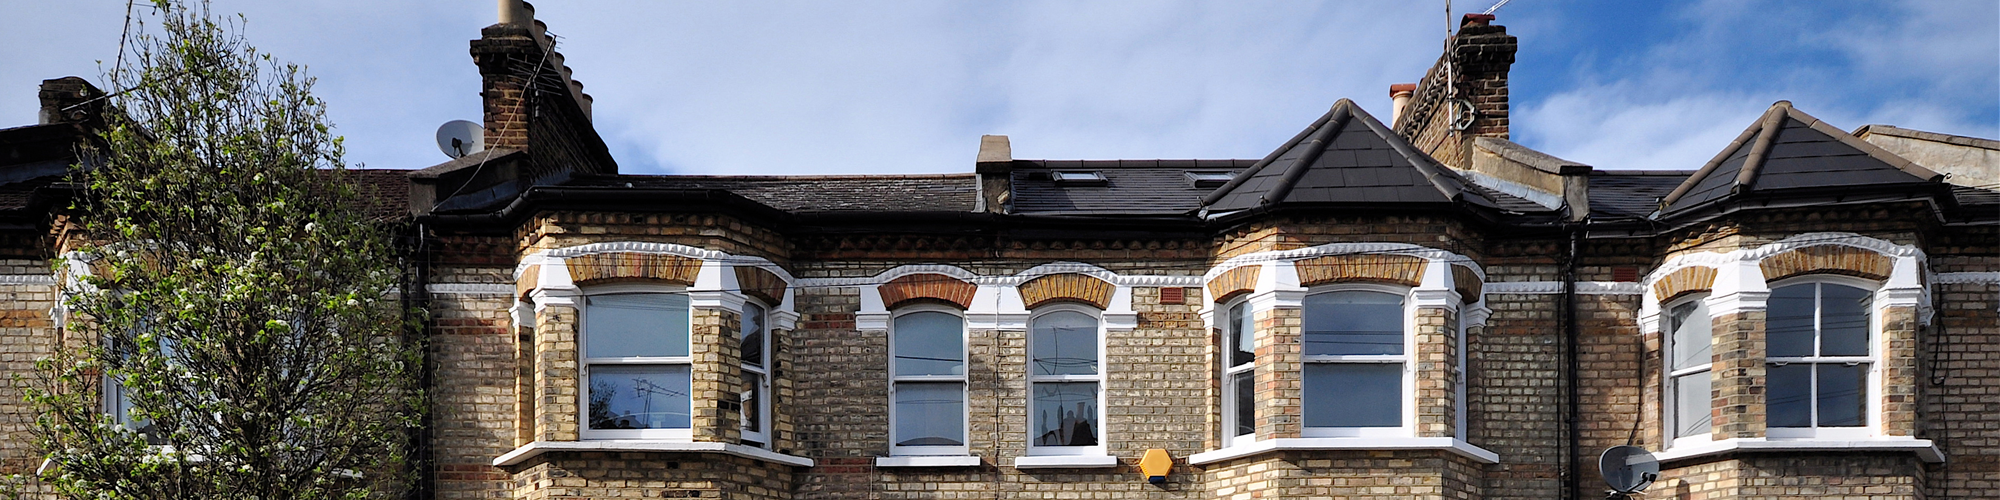 Typical Victorian house in London. SAM Conveyancing's guide on buying a Victorian House